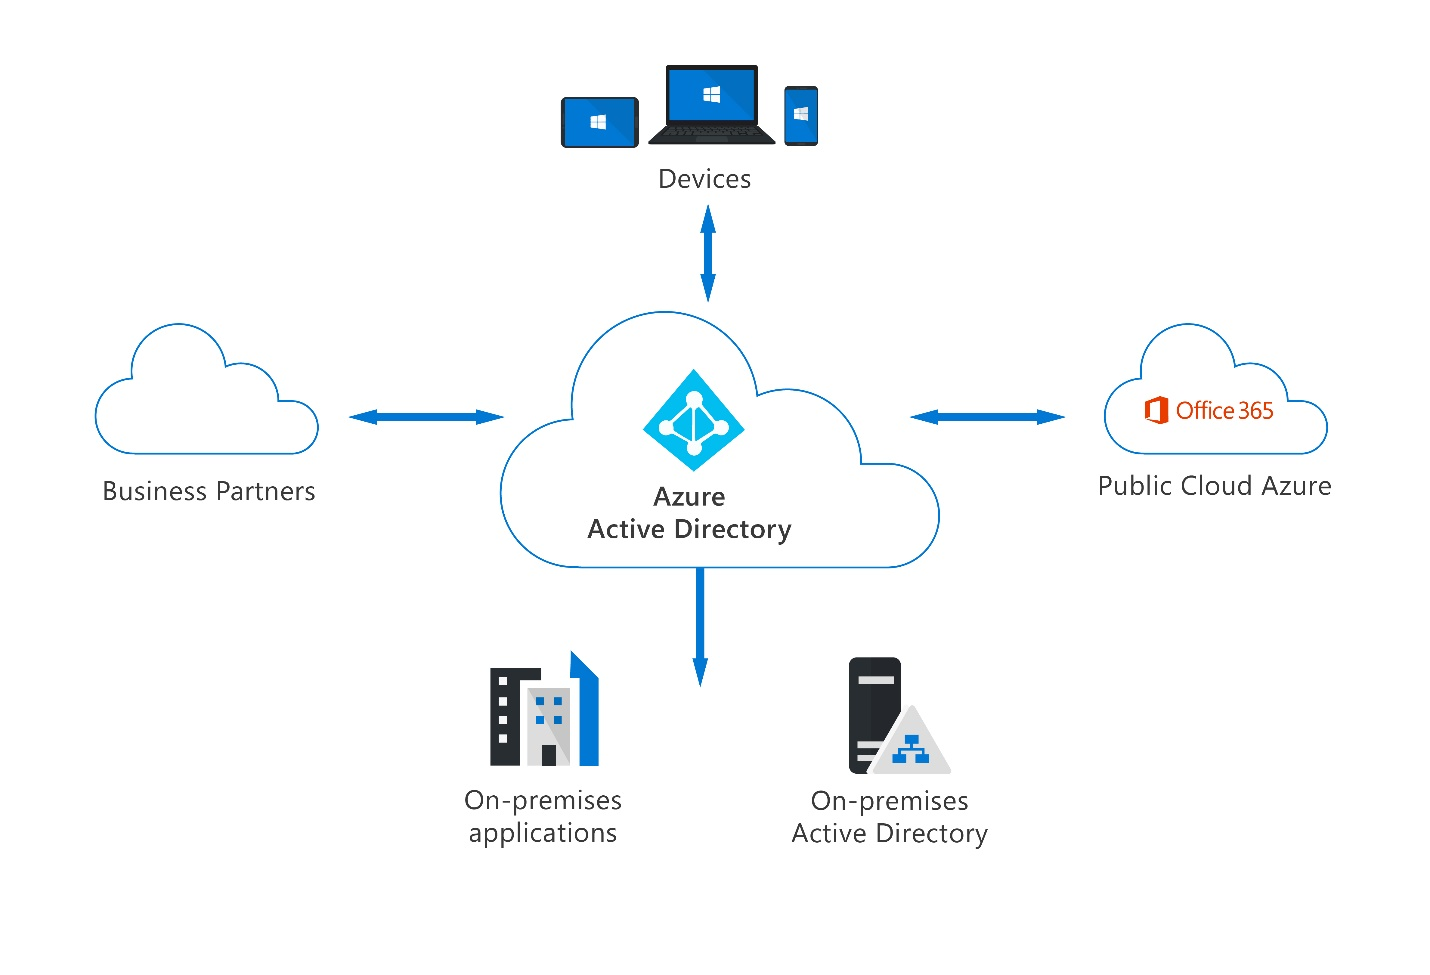 Azure Active Directory works with cloud apps such as M365, devices, and on-premises applications